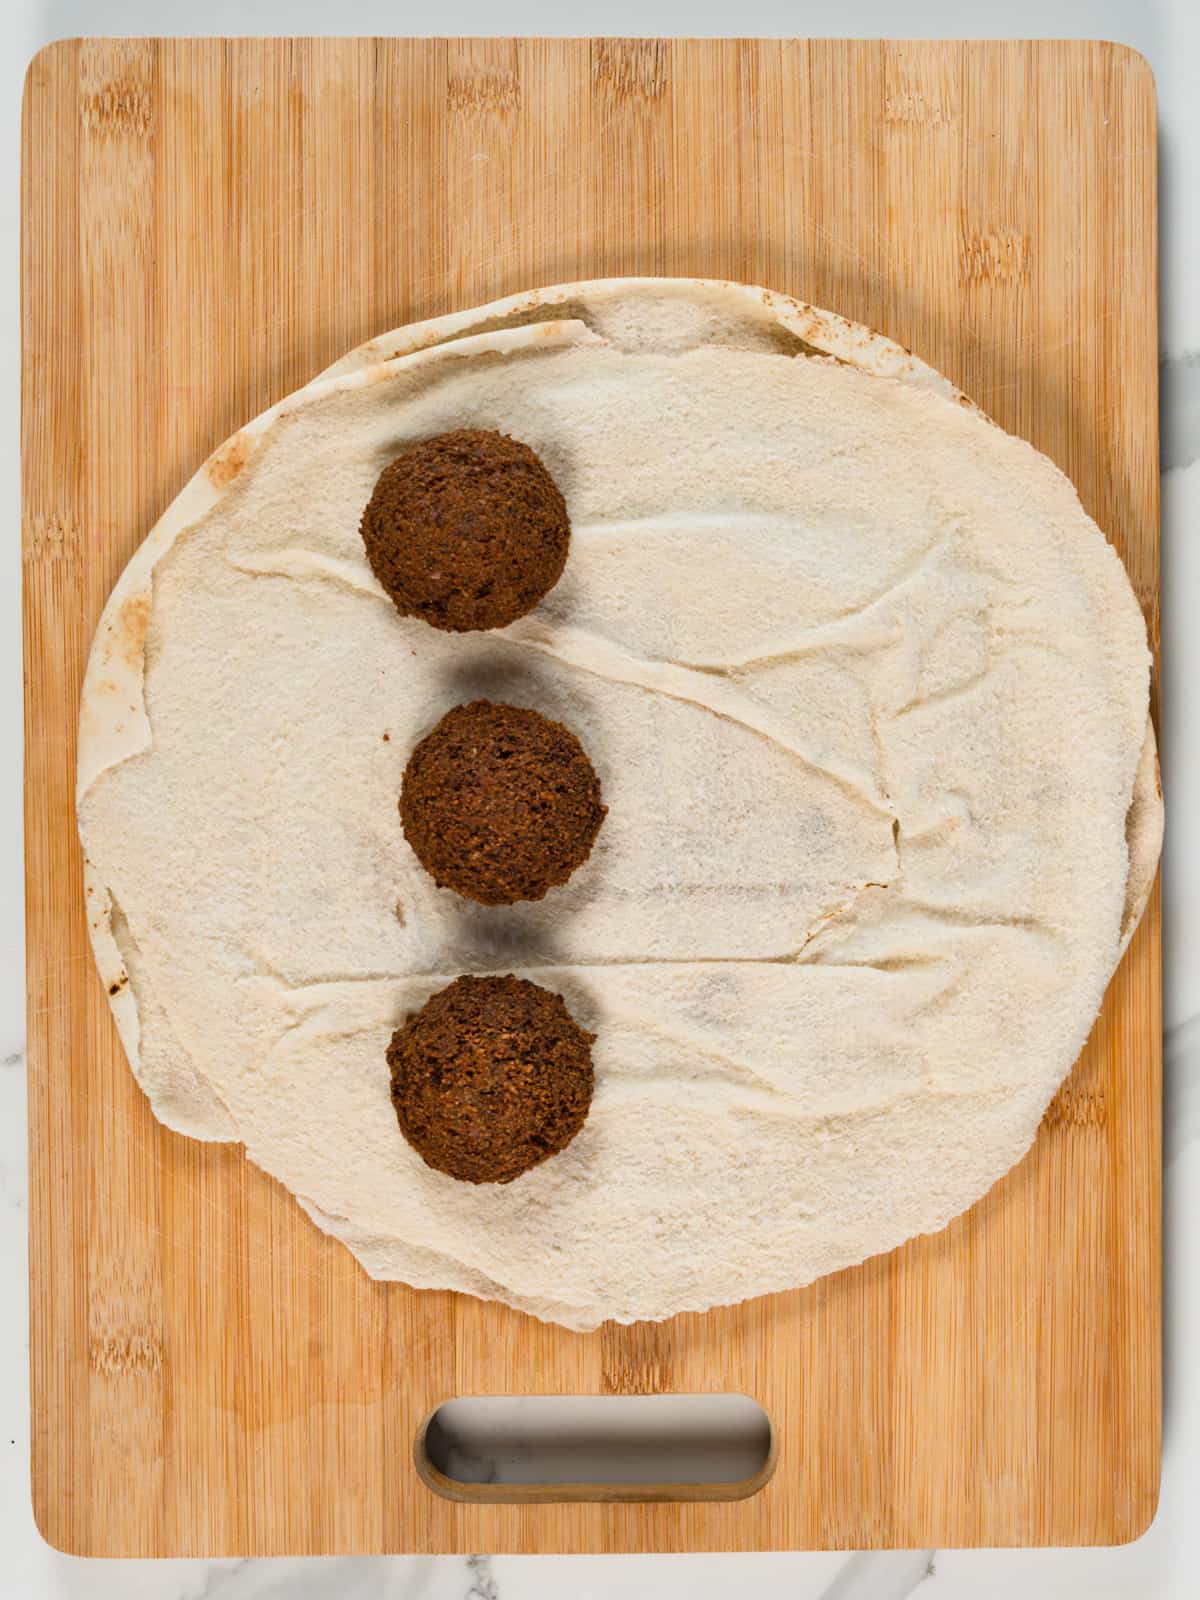 round pita bread with 3 brown falafel balls on a wood chopping board